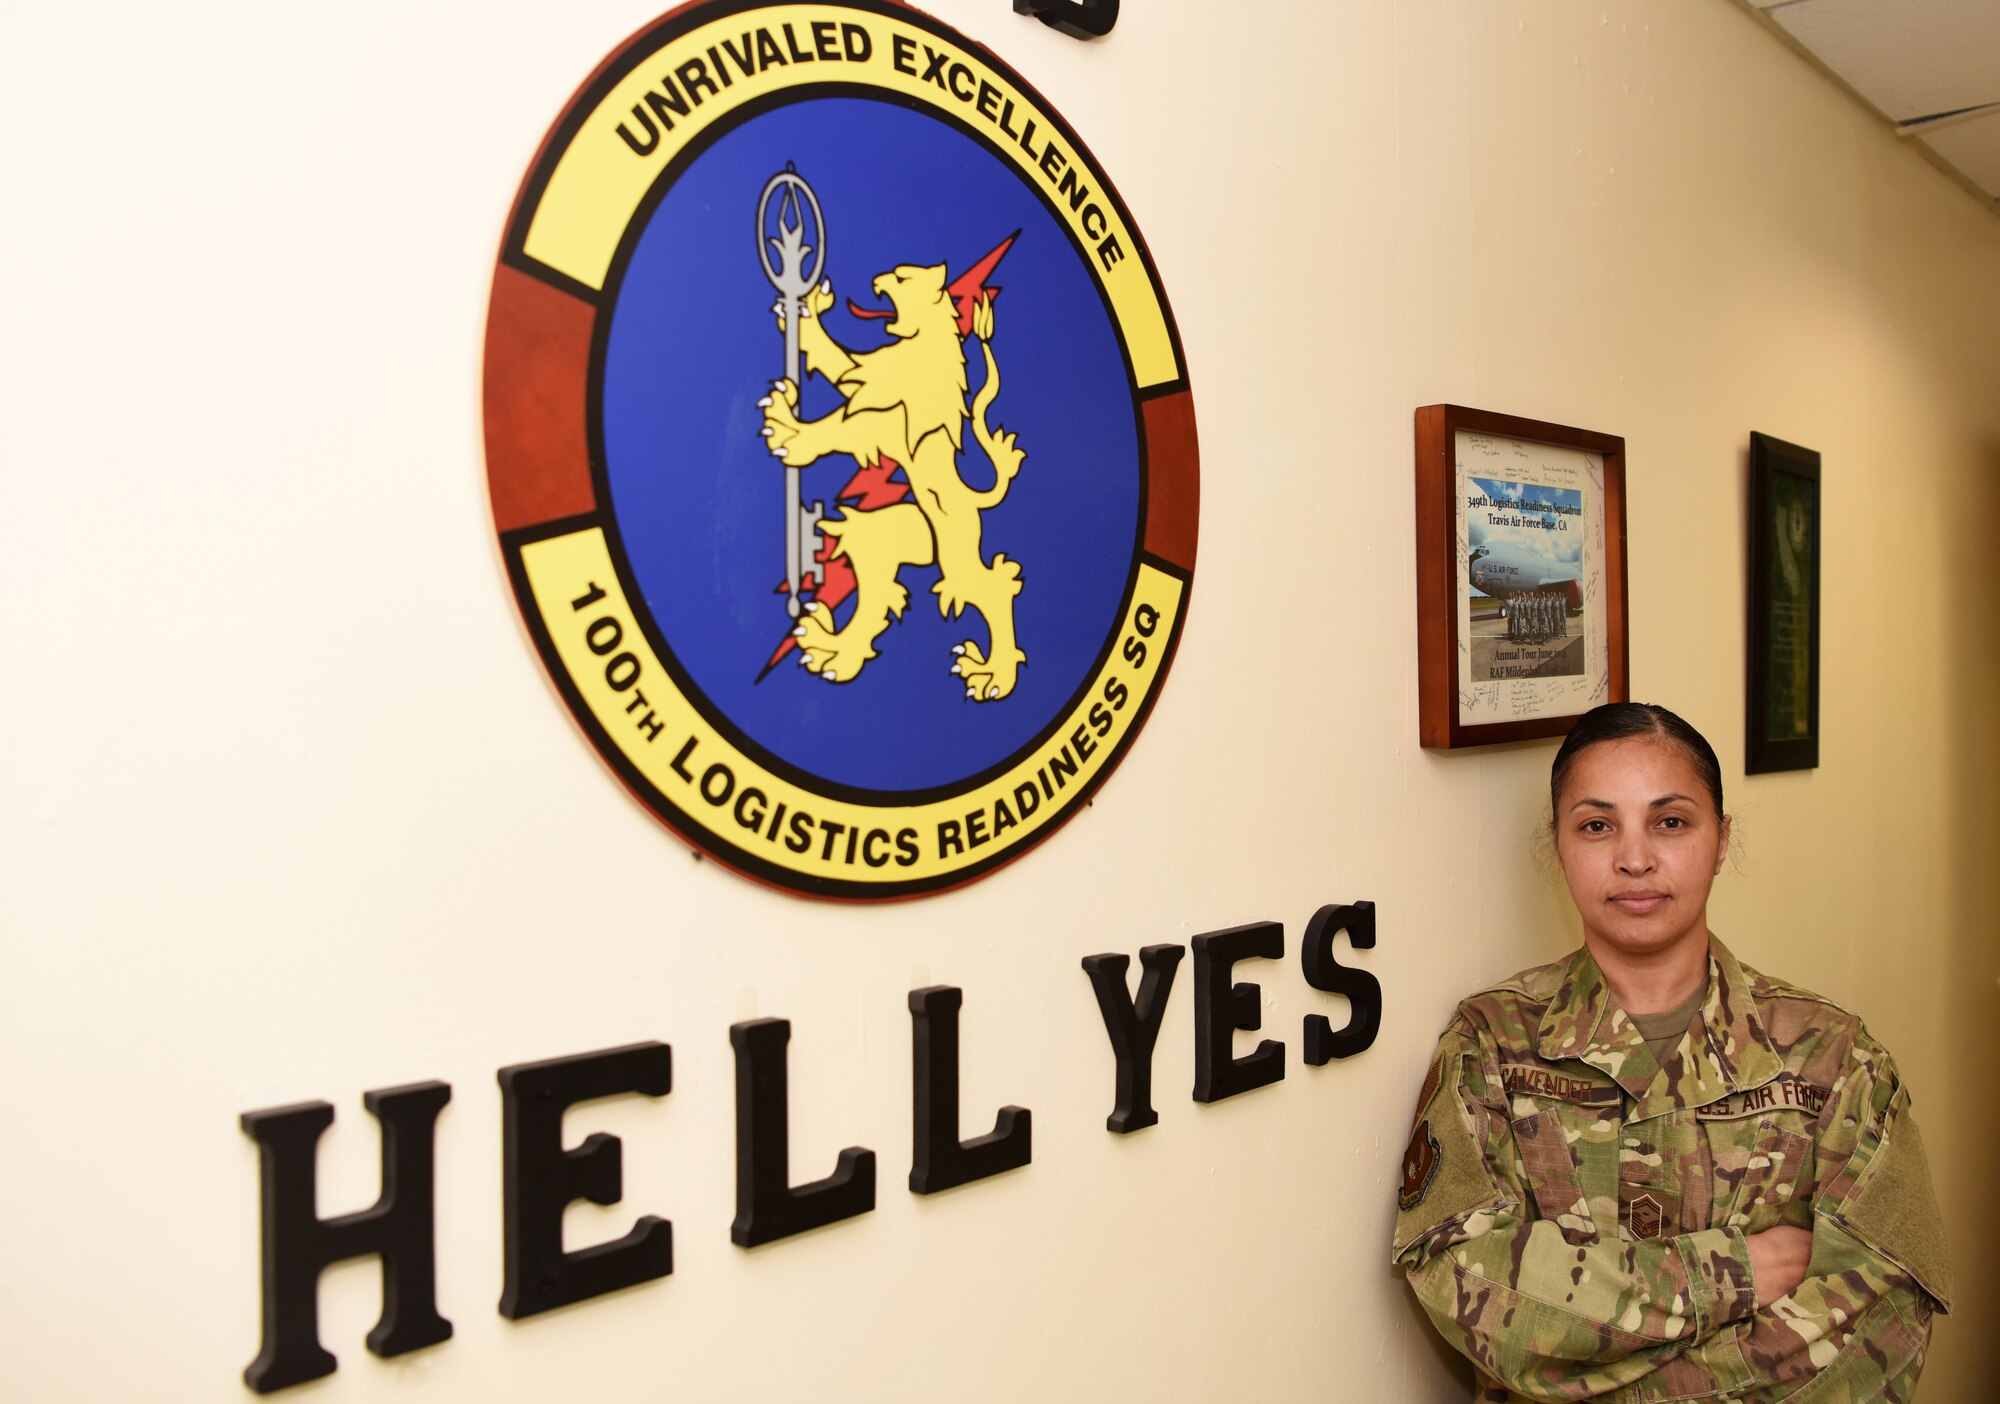 U.S. Air Force Senior Master Sgt. Arwa Cavender, 100th Logistics Readiness Squadron first sergeant, poses for a photo at RAF Mildenhall, England, April 4, 2019. Cavender, who began her career at Maxwell Air Force Base, Alabama as a medical administrator, has been a first sergeant at both Holloman Air Force Base, New Mexico and RAF Mildenhall. (U.S. Air Force photo by Airman 1st Class Brandon Esau)